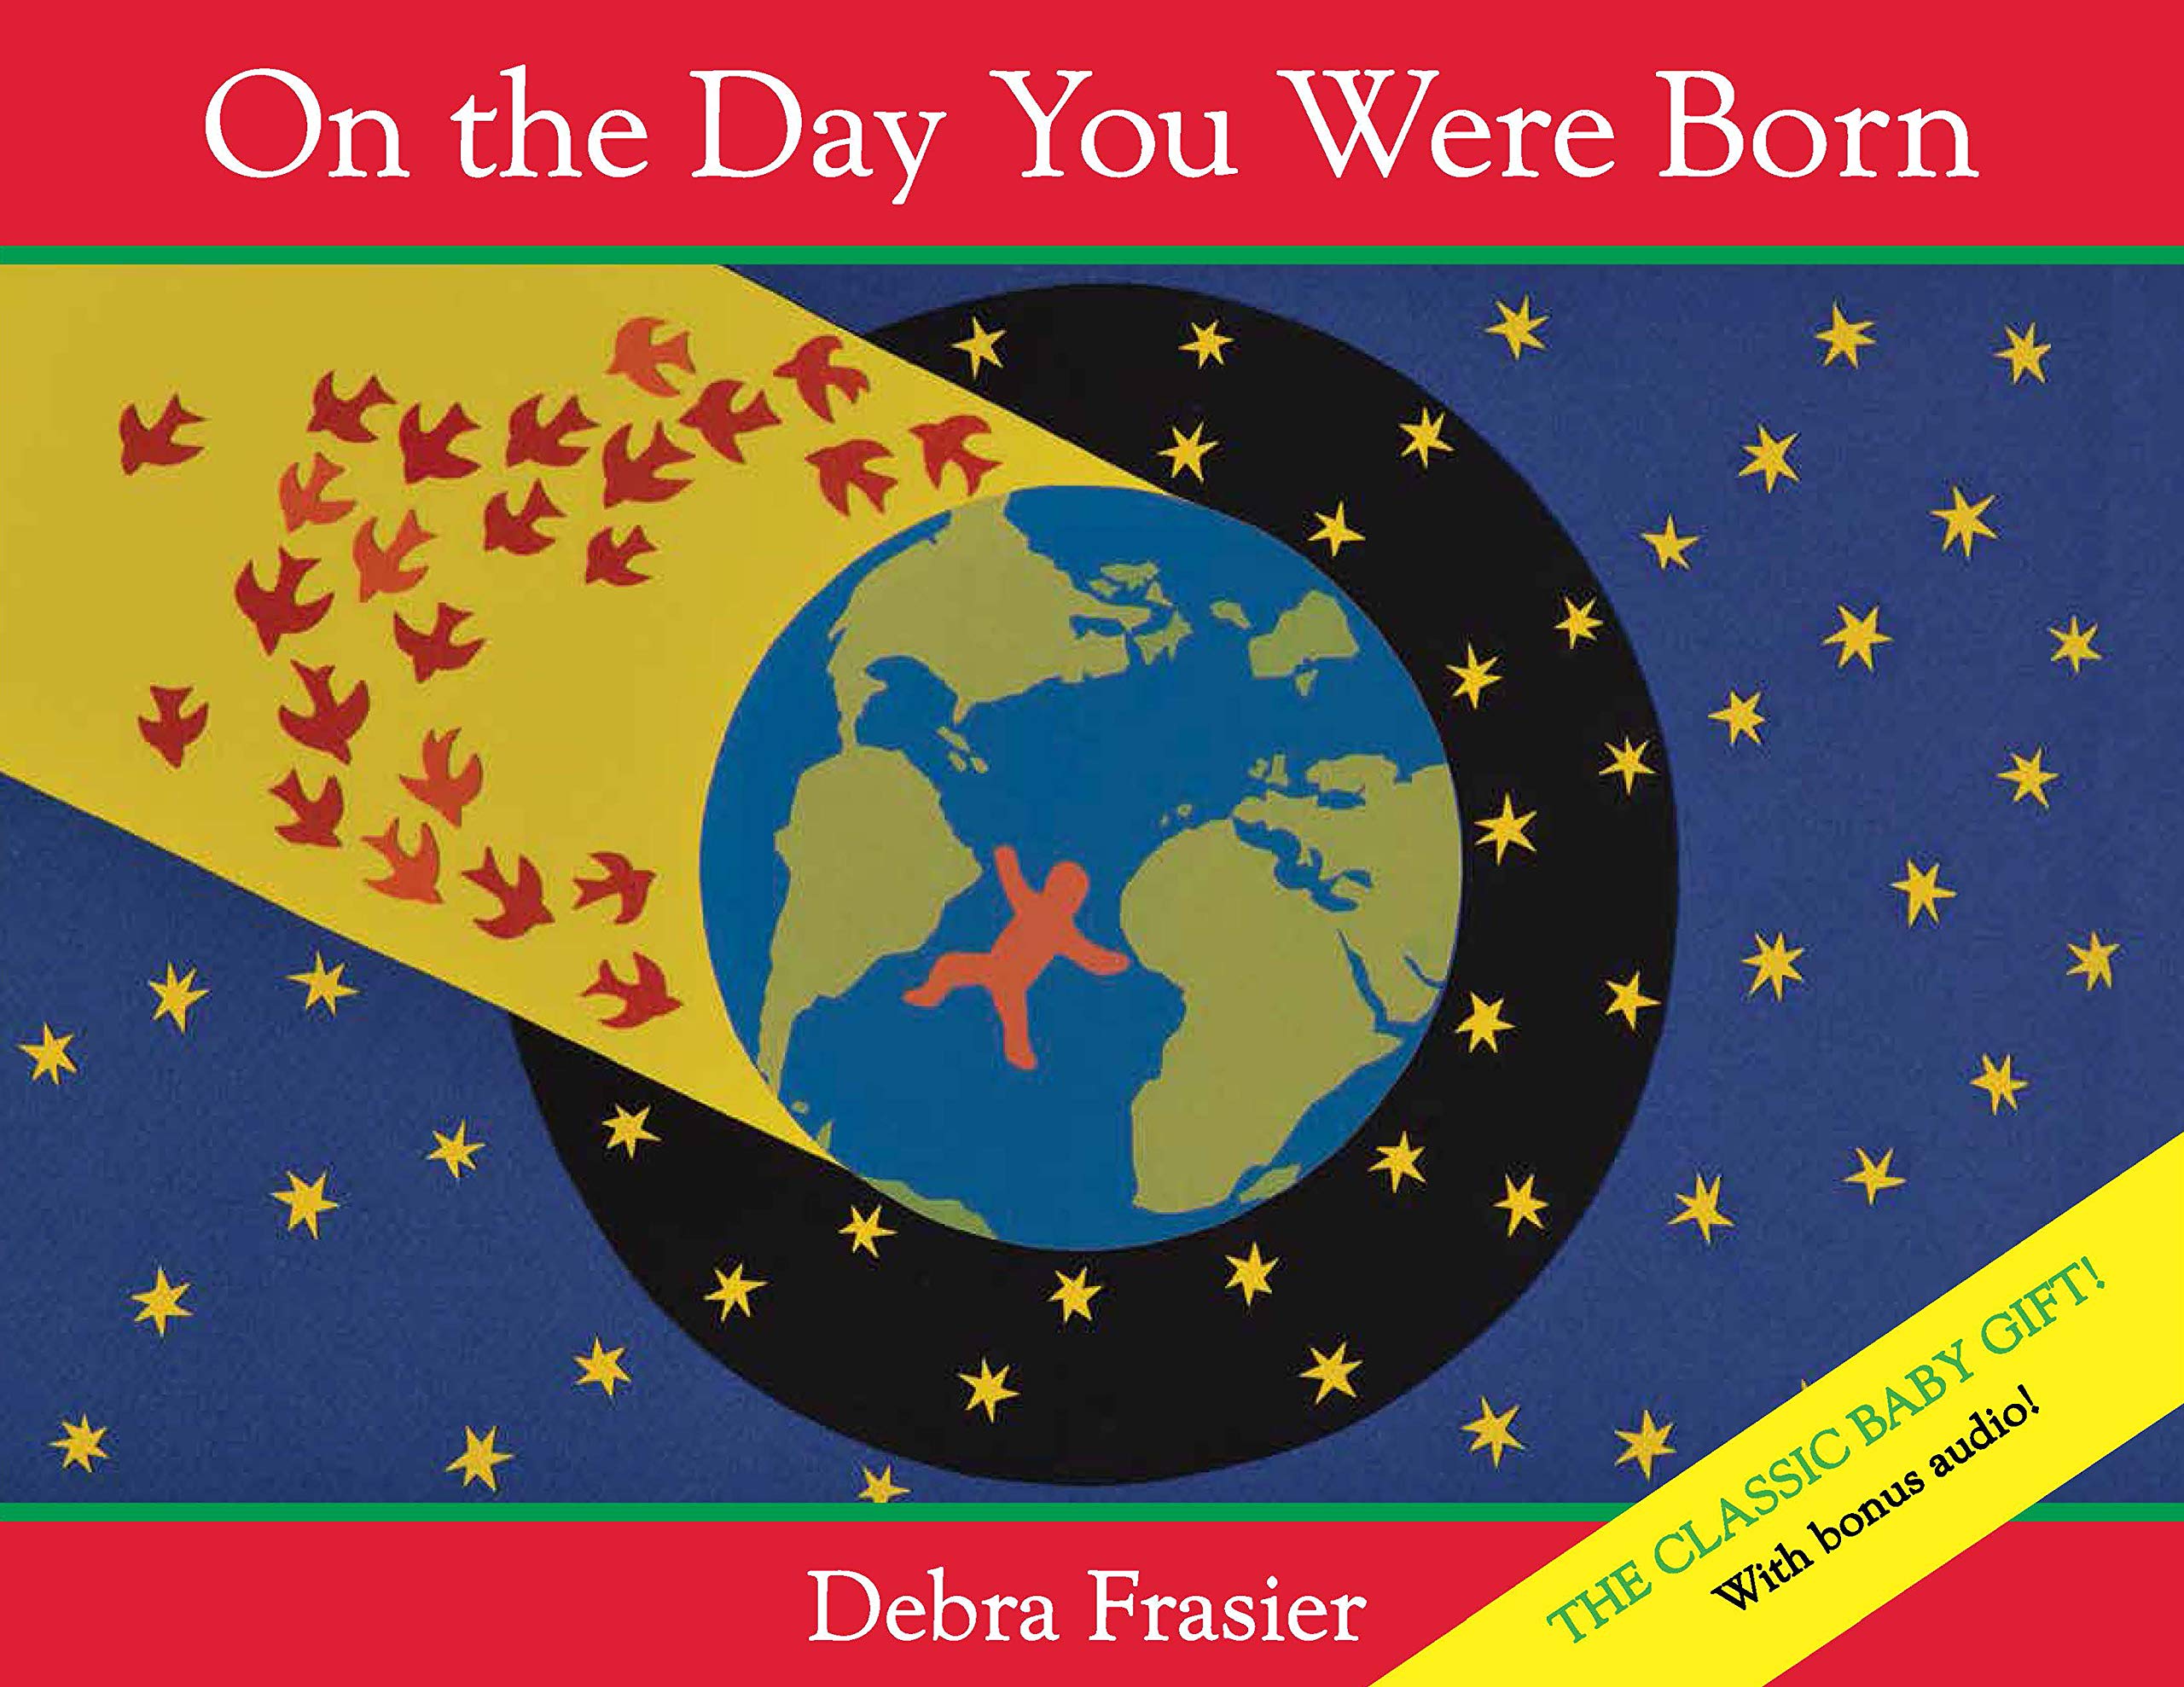 On the Day You Were Born (Hardcover)